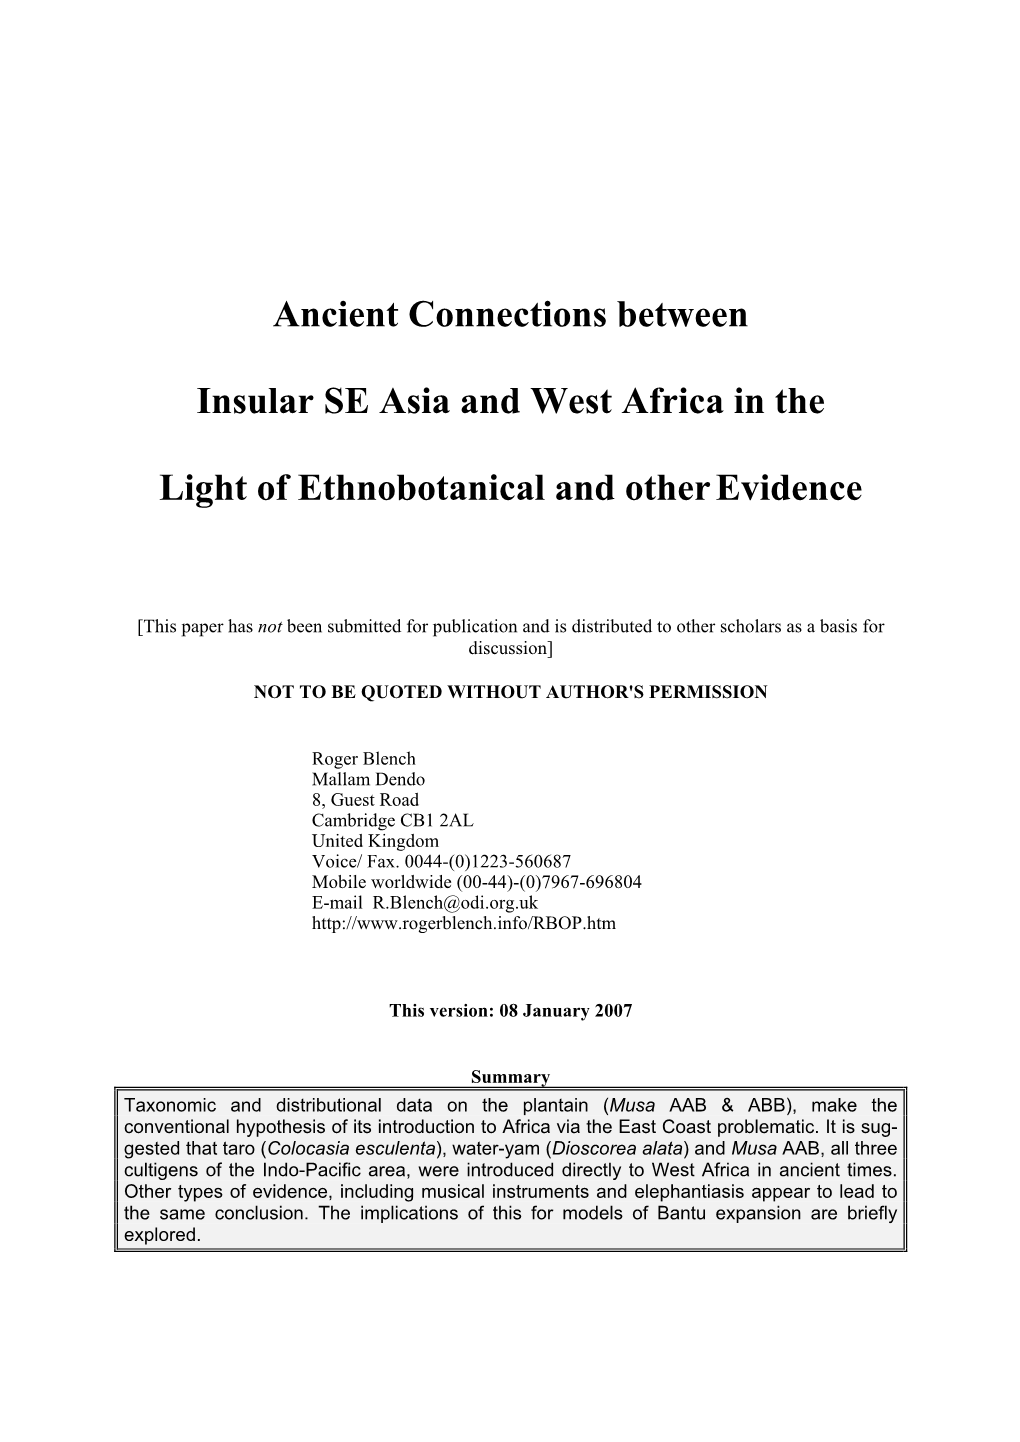 Ancient Connections Between Insular SE Asia and West Africa in the Light